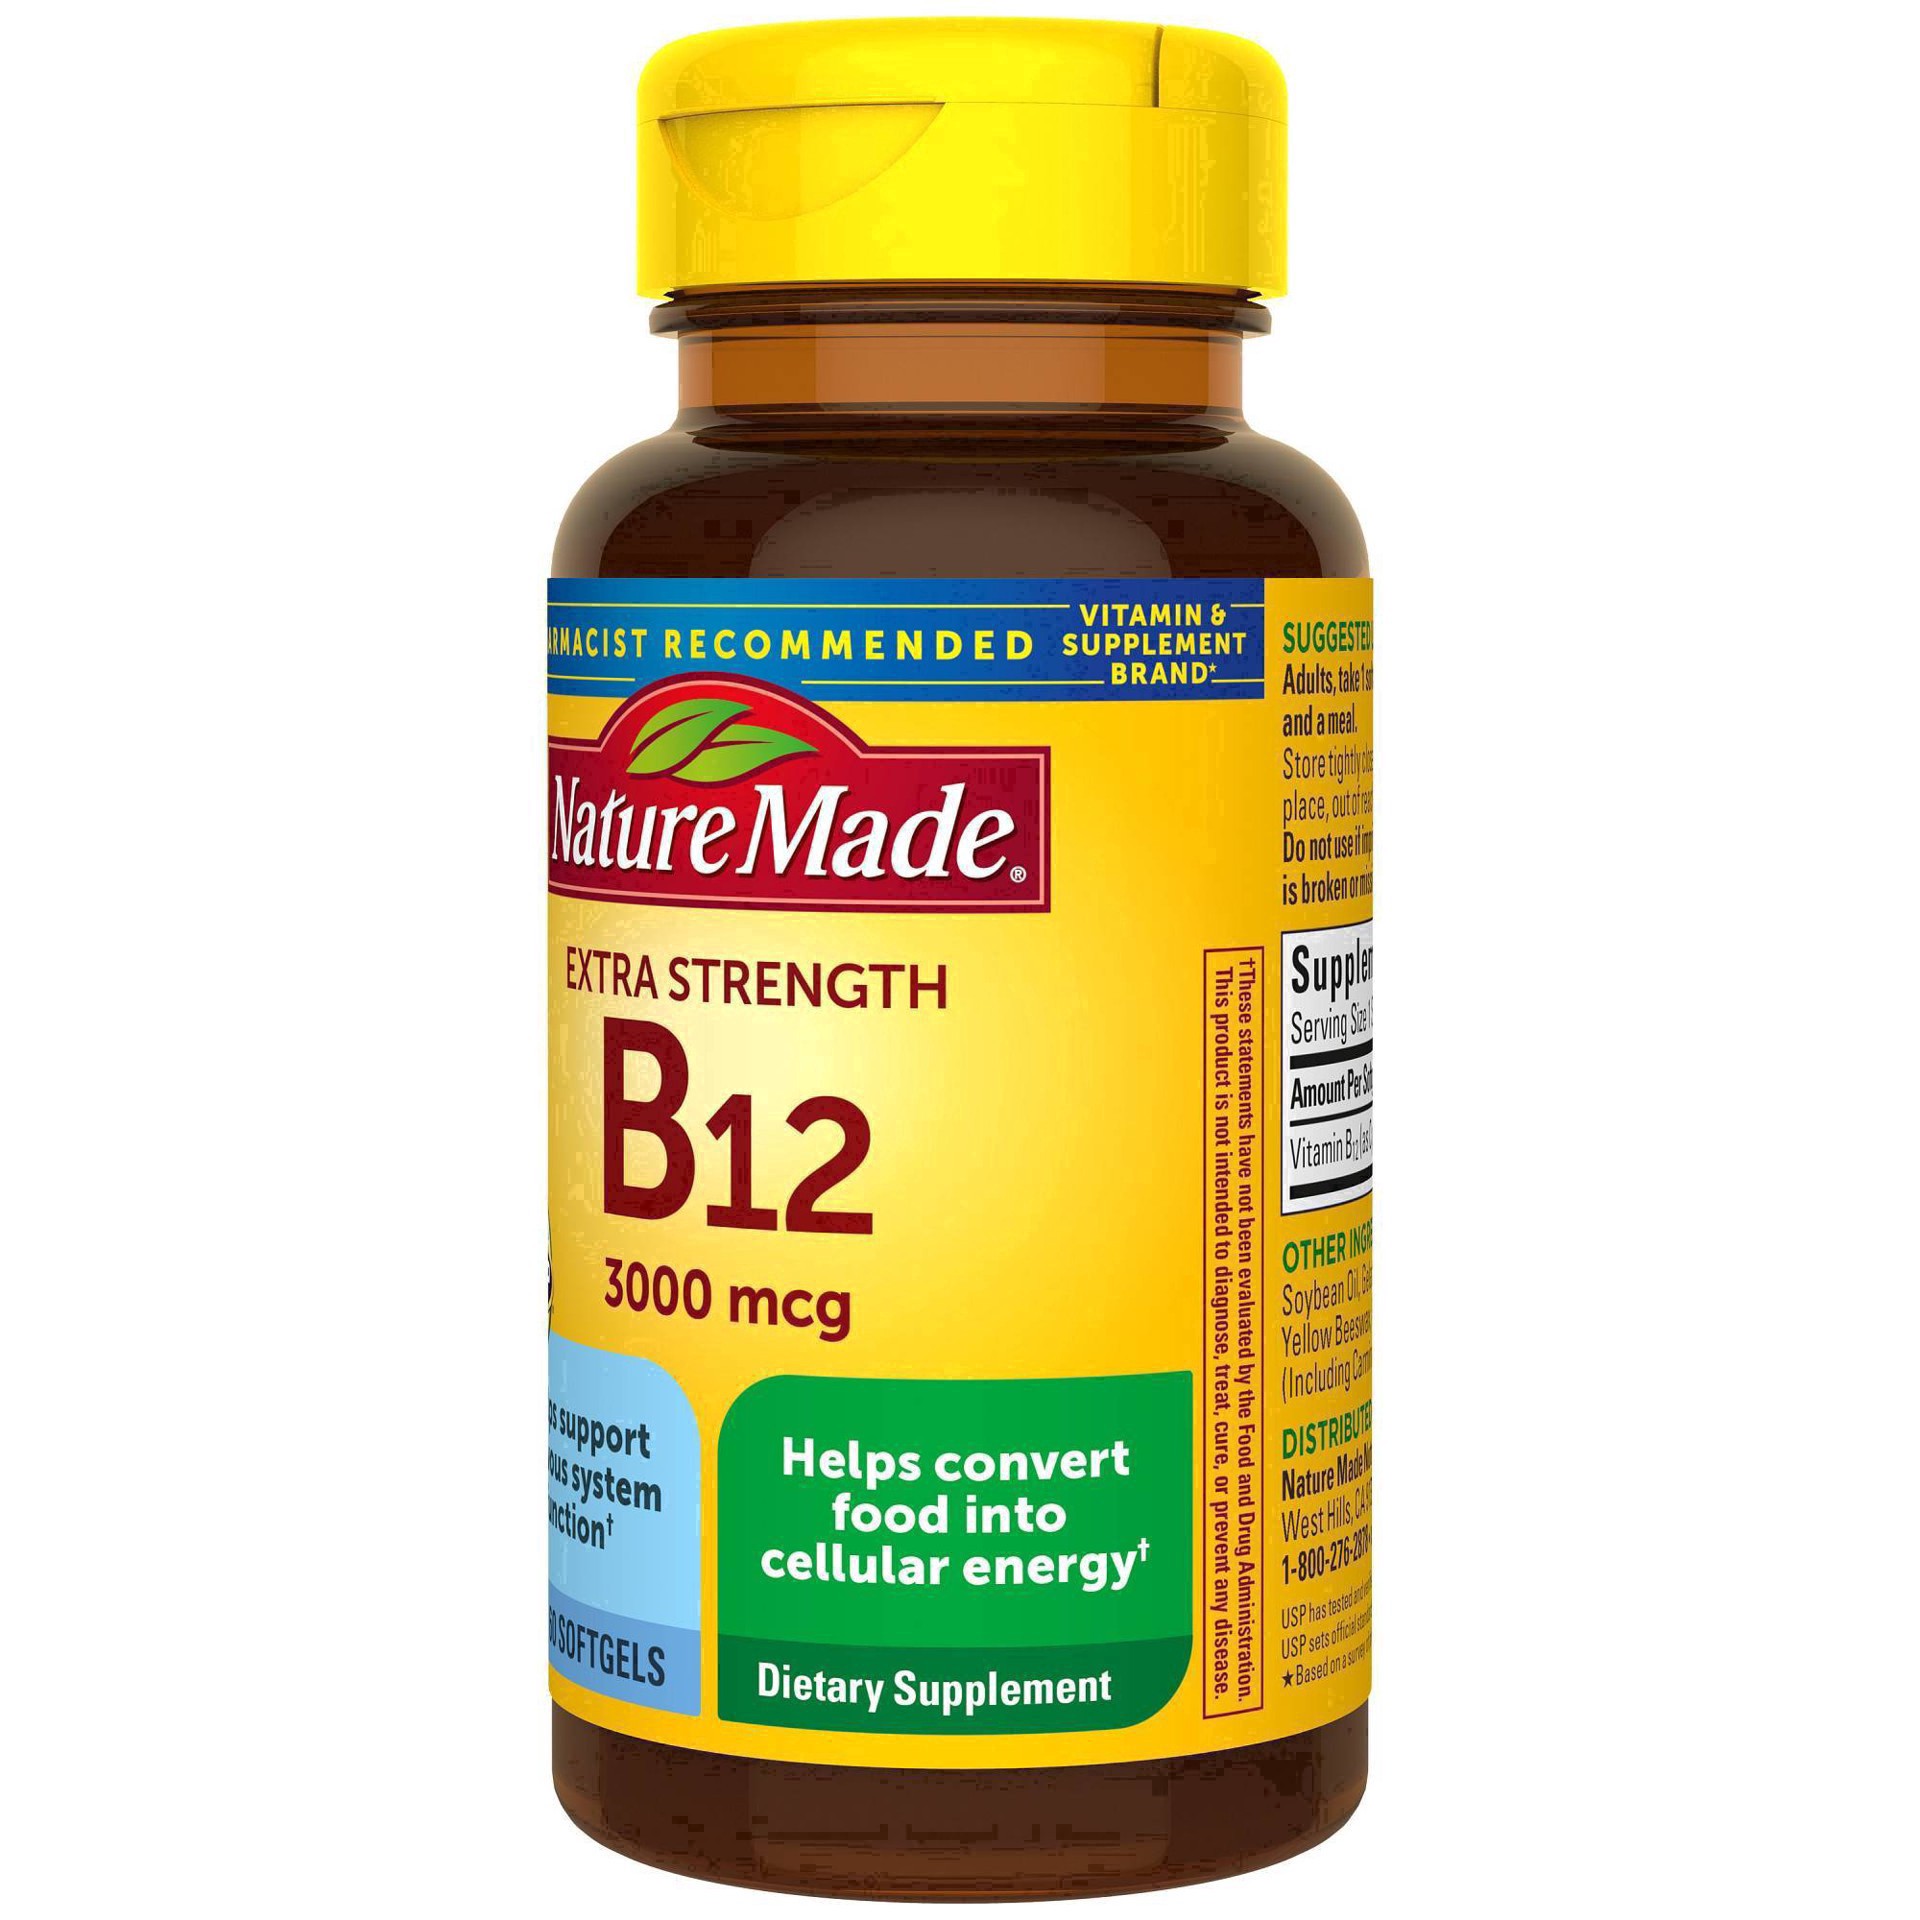 slide 11 of 74, Nature Made Extra Strength Vitamin B12 3000 mcg Energy Metabolism Support Softgels - 60ct, 60 ct